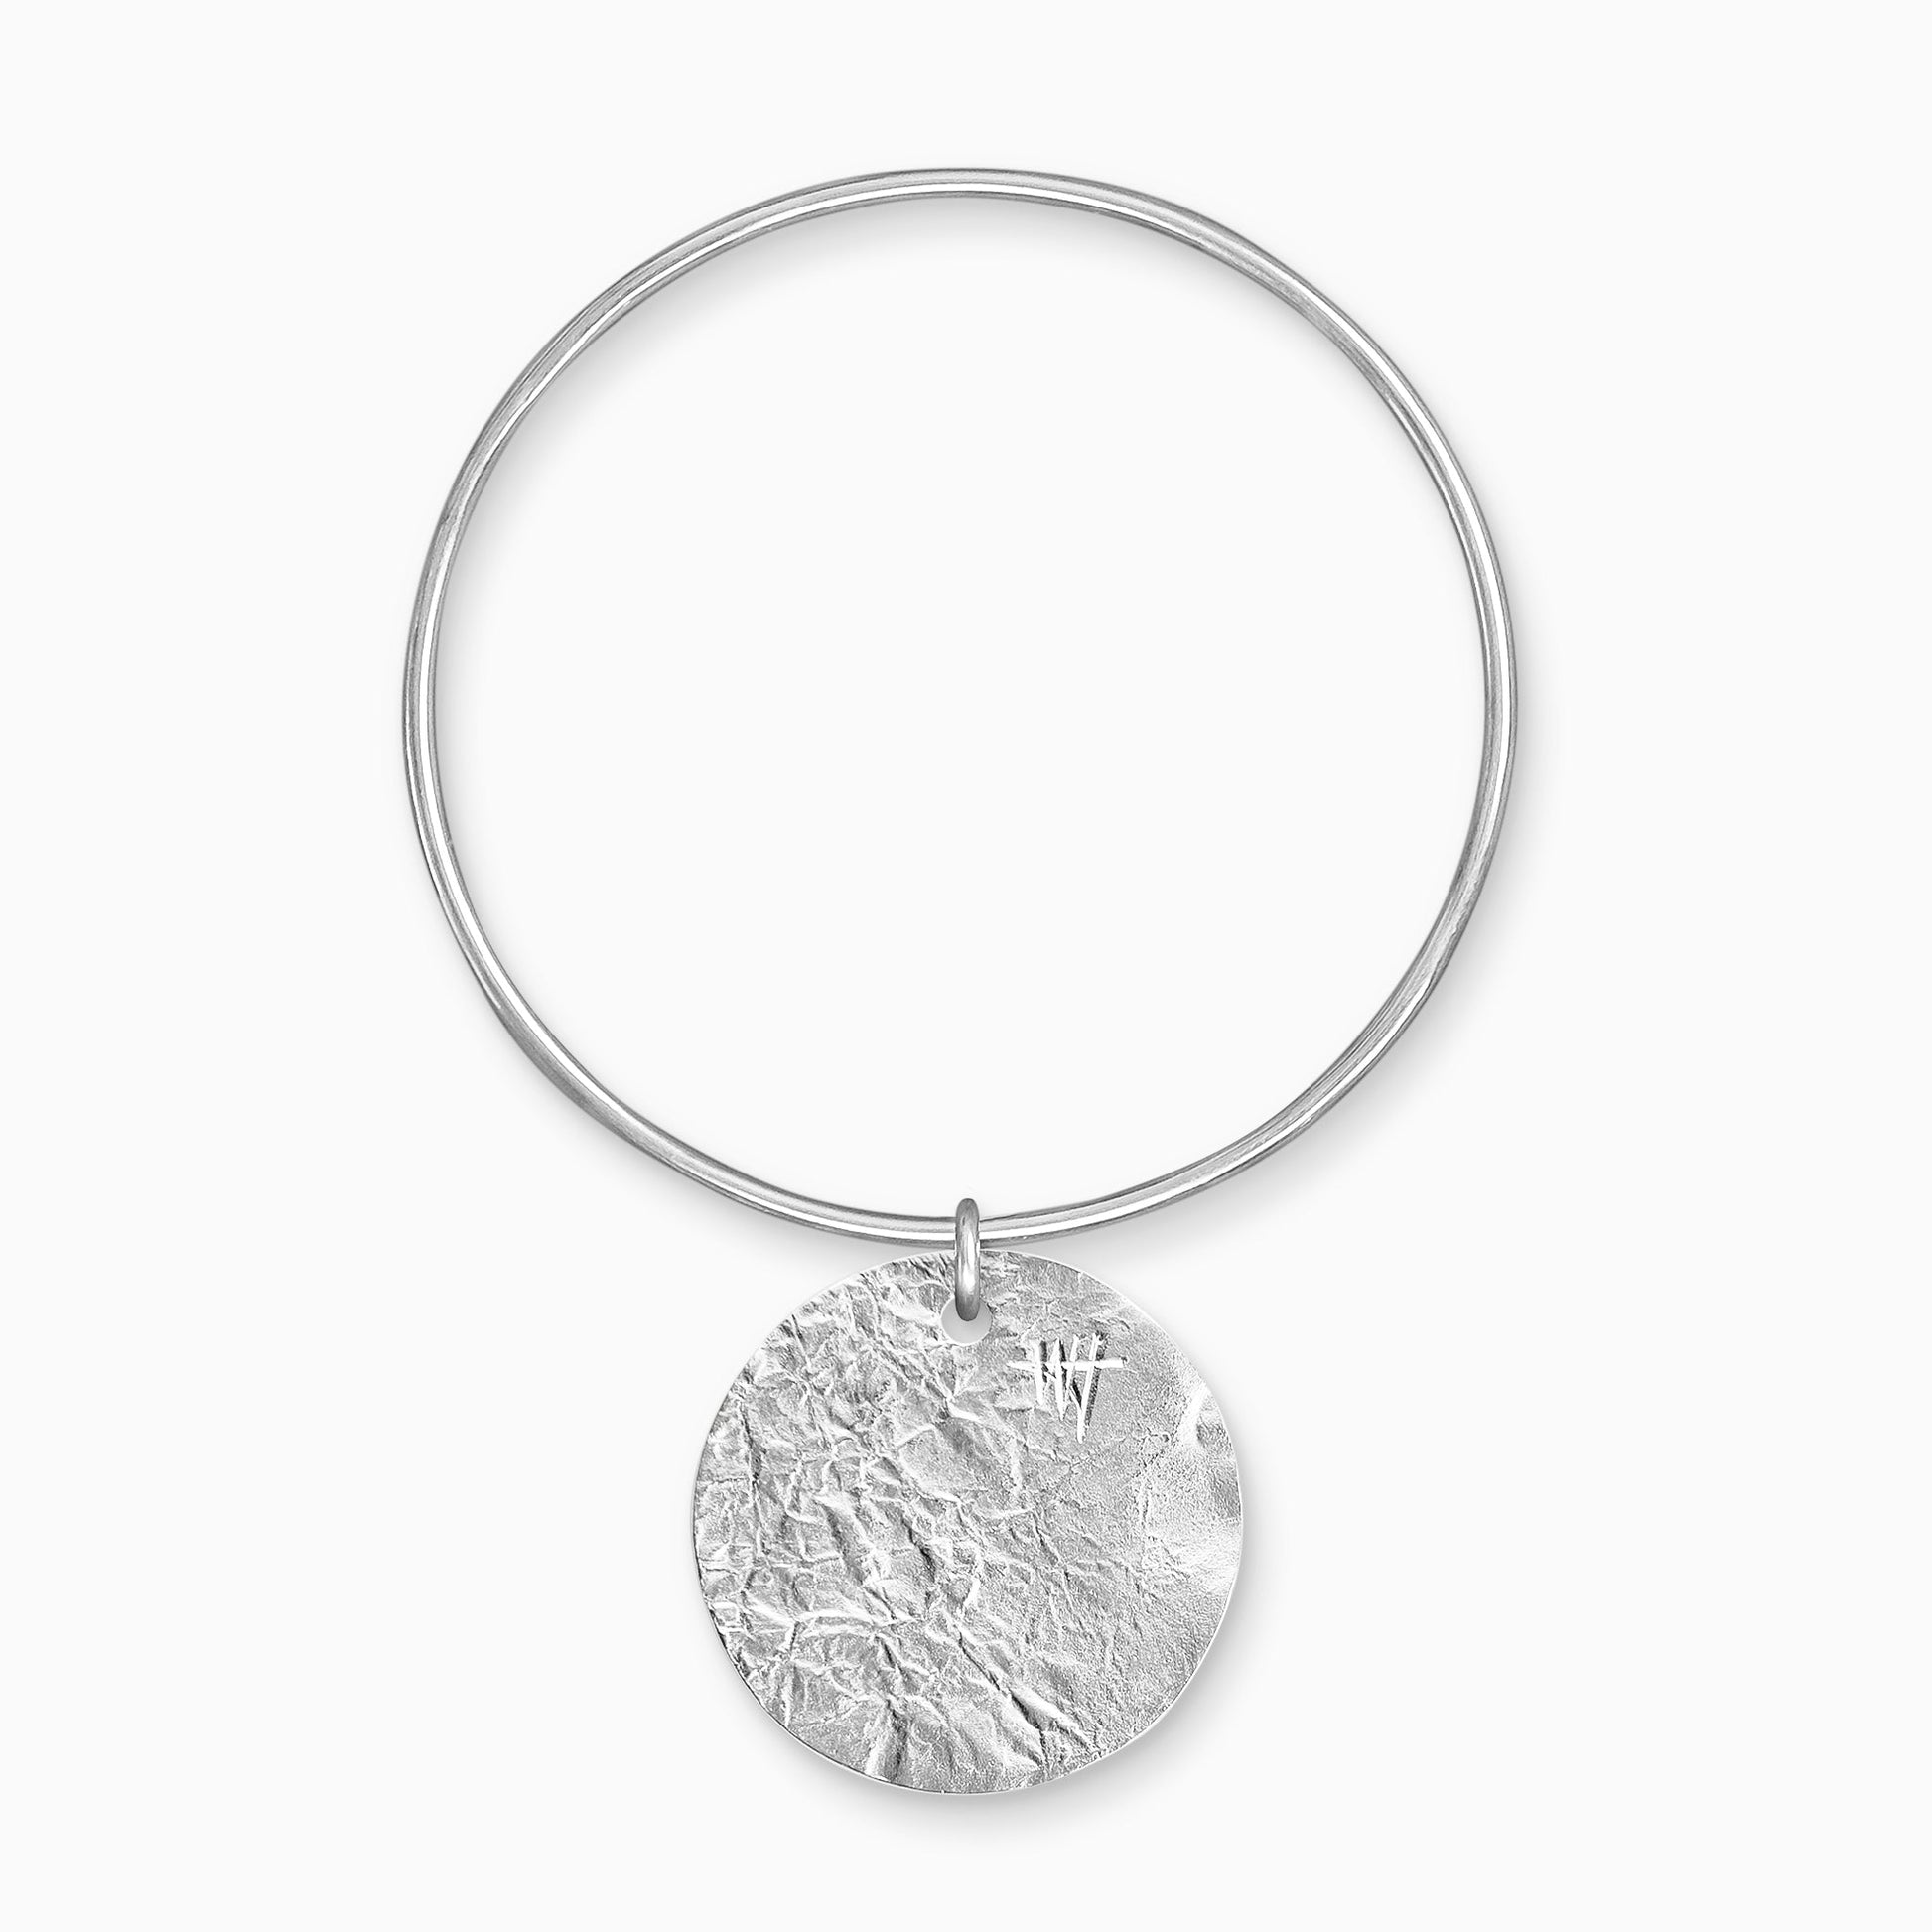 A recycled Silver Textured, circular, flat disc charm freely moving on a round wire bangle. Charm 35mm. Bangle 63mm x 2mm.